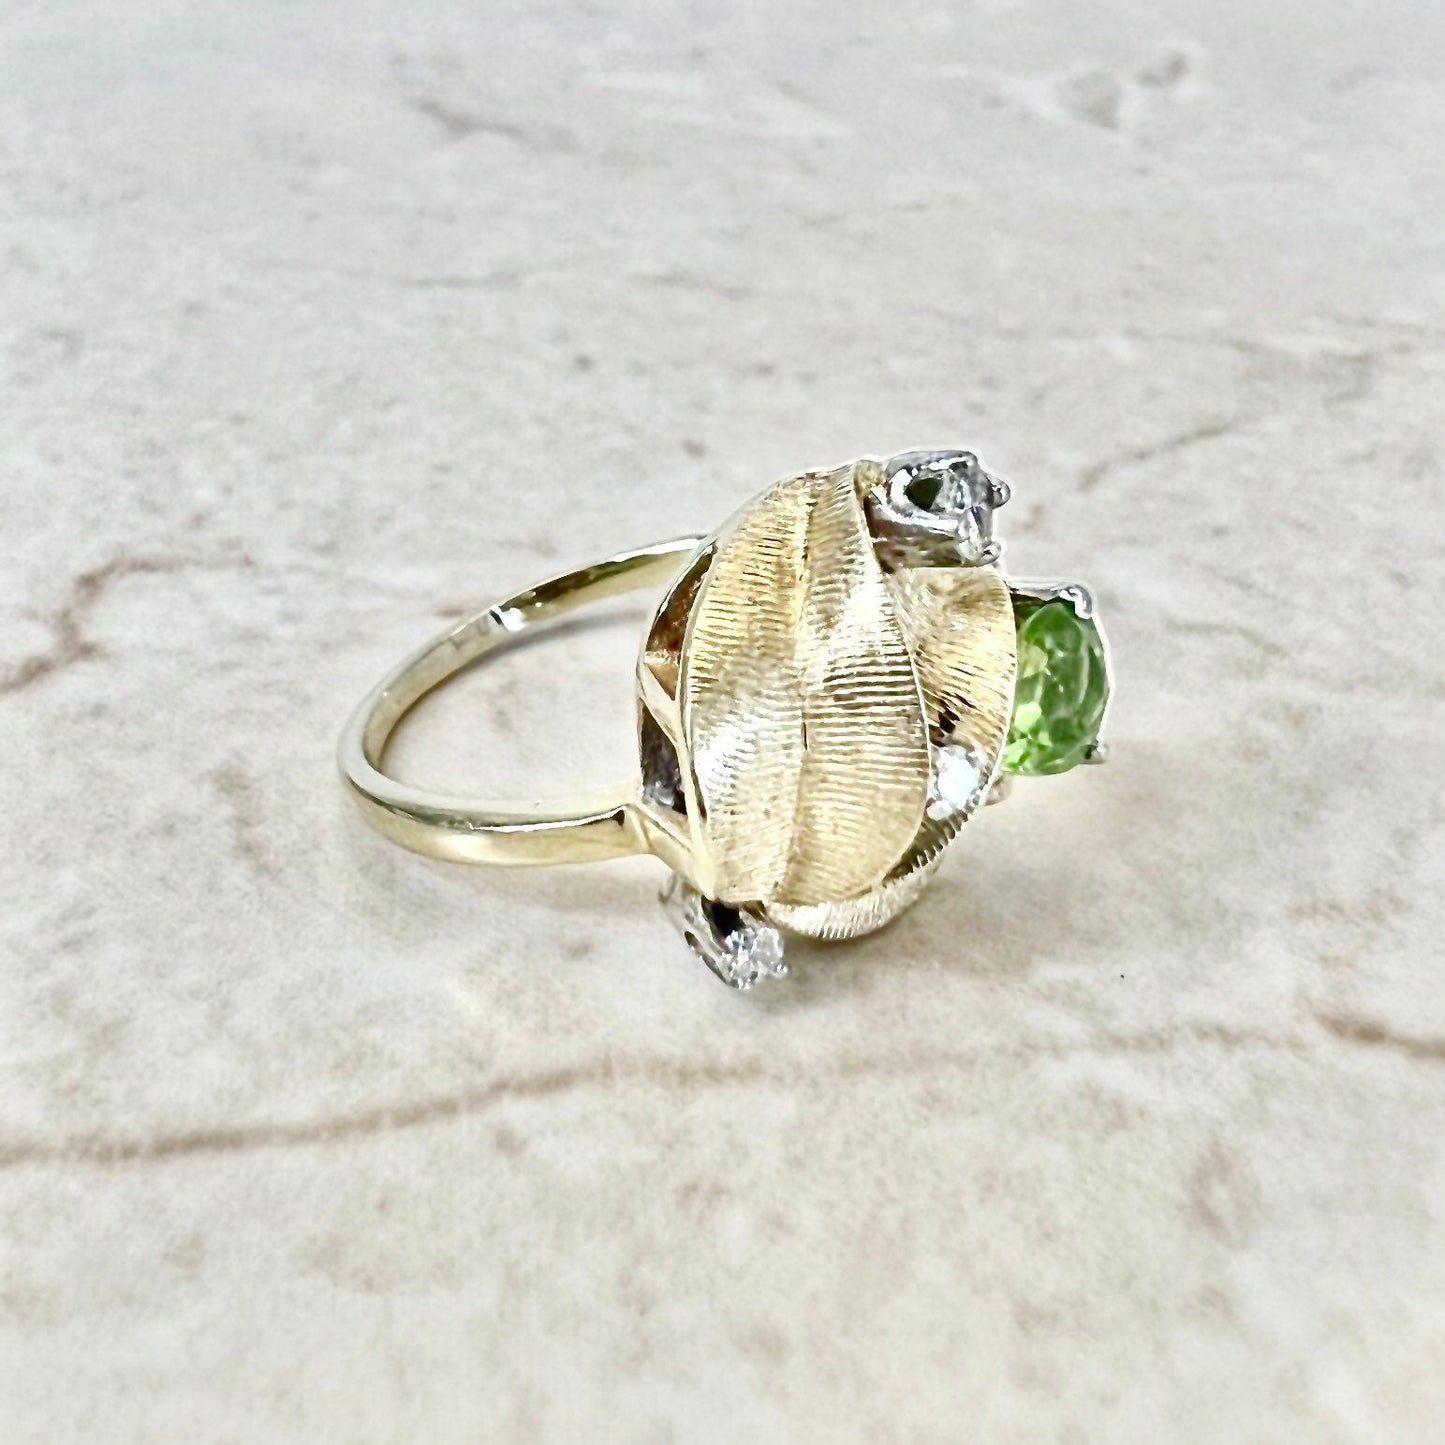 Vintage Floral 14K Peridot & Diamond Cocktail Ring - Yellow Gold Peridot Ring - Statement Ring - Birthday Gift For Her - August Birthstone